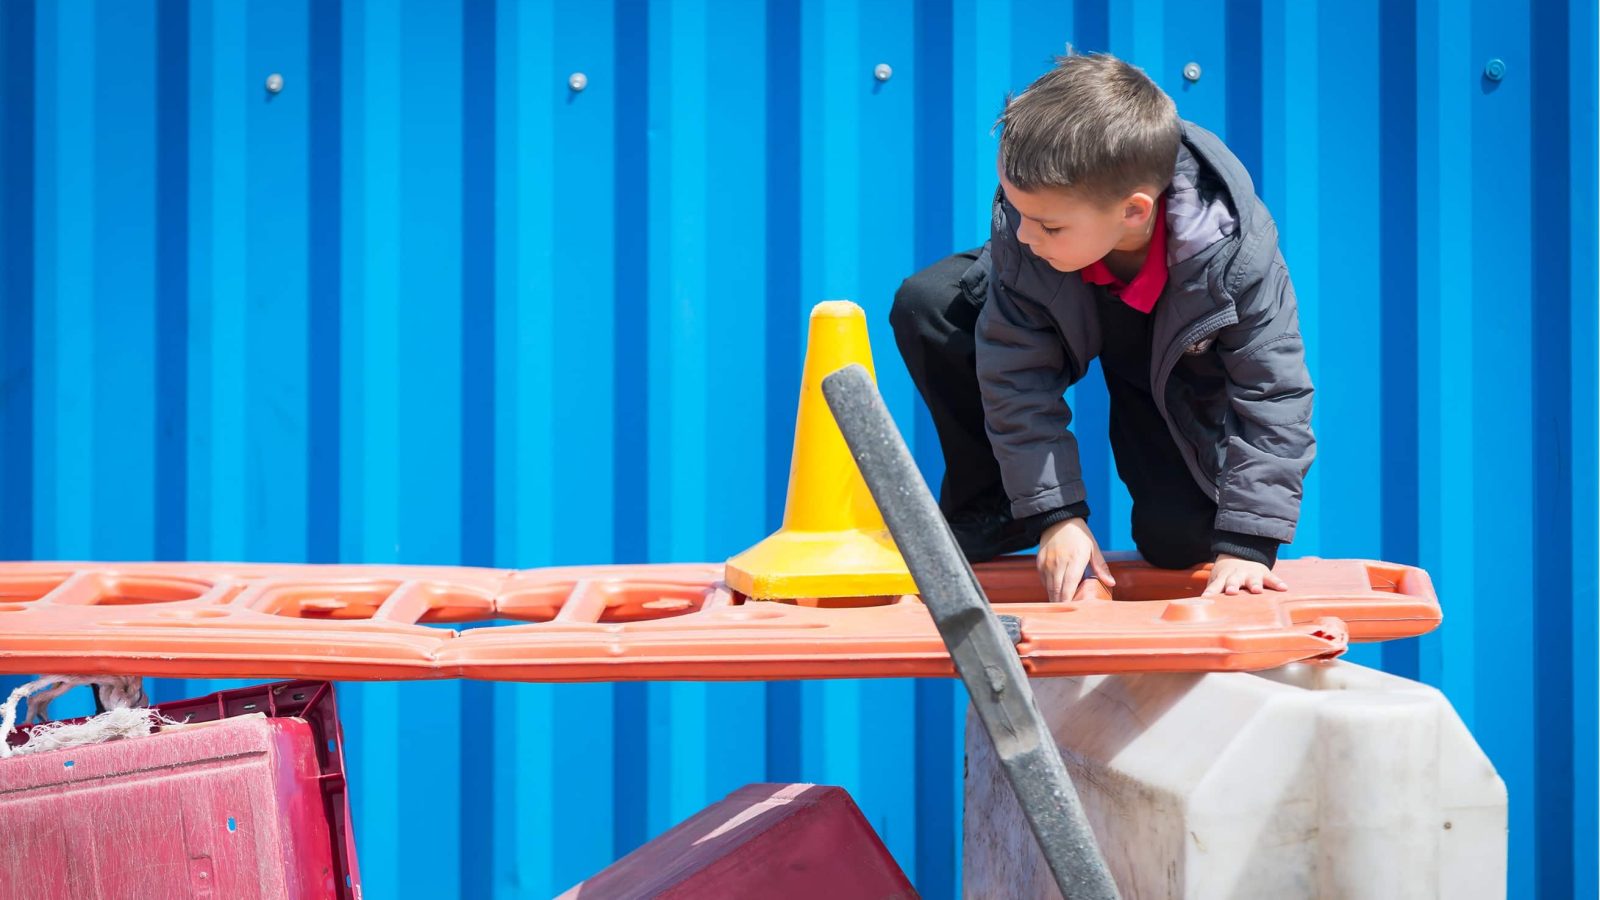 A young boy interacts with a construction barrier in front of a bright blue corrugated metal surface, with a yellow traffic cone visible on the barrier.